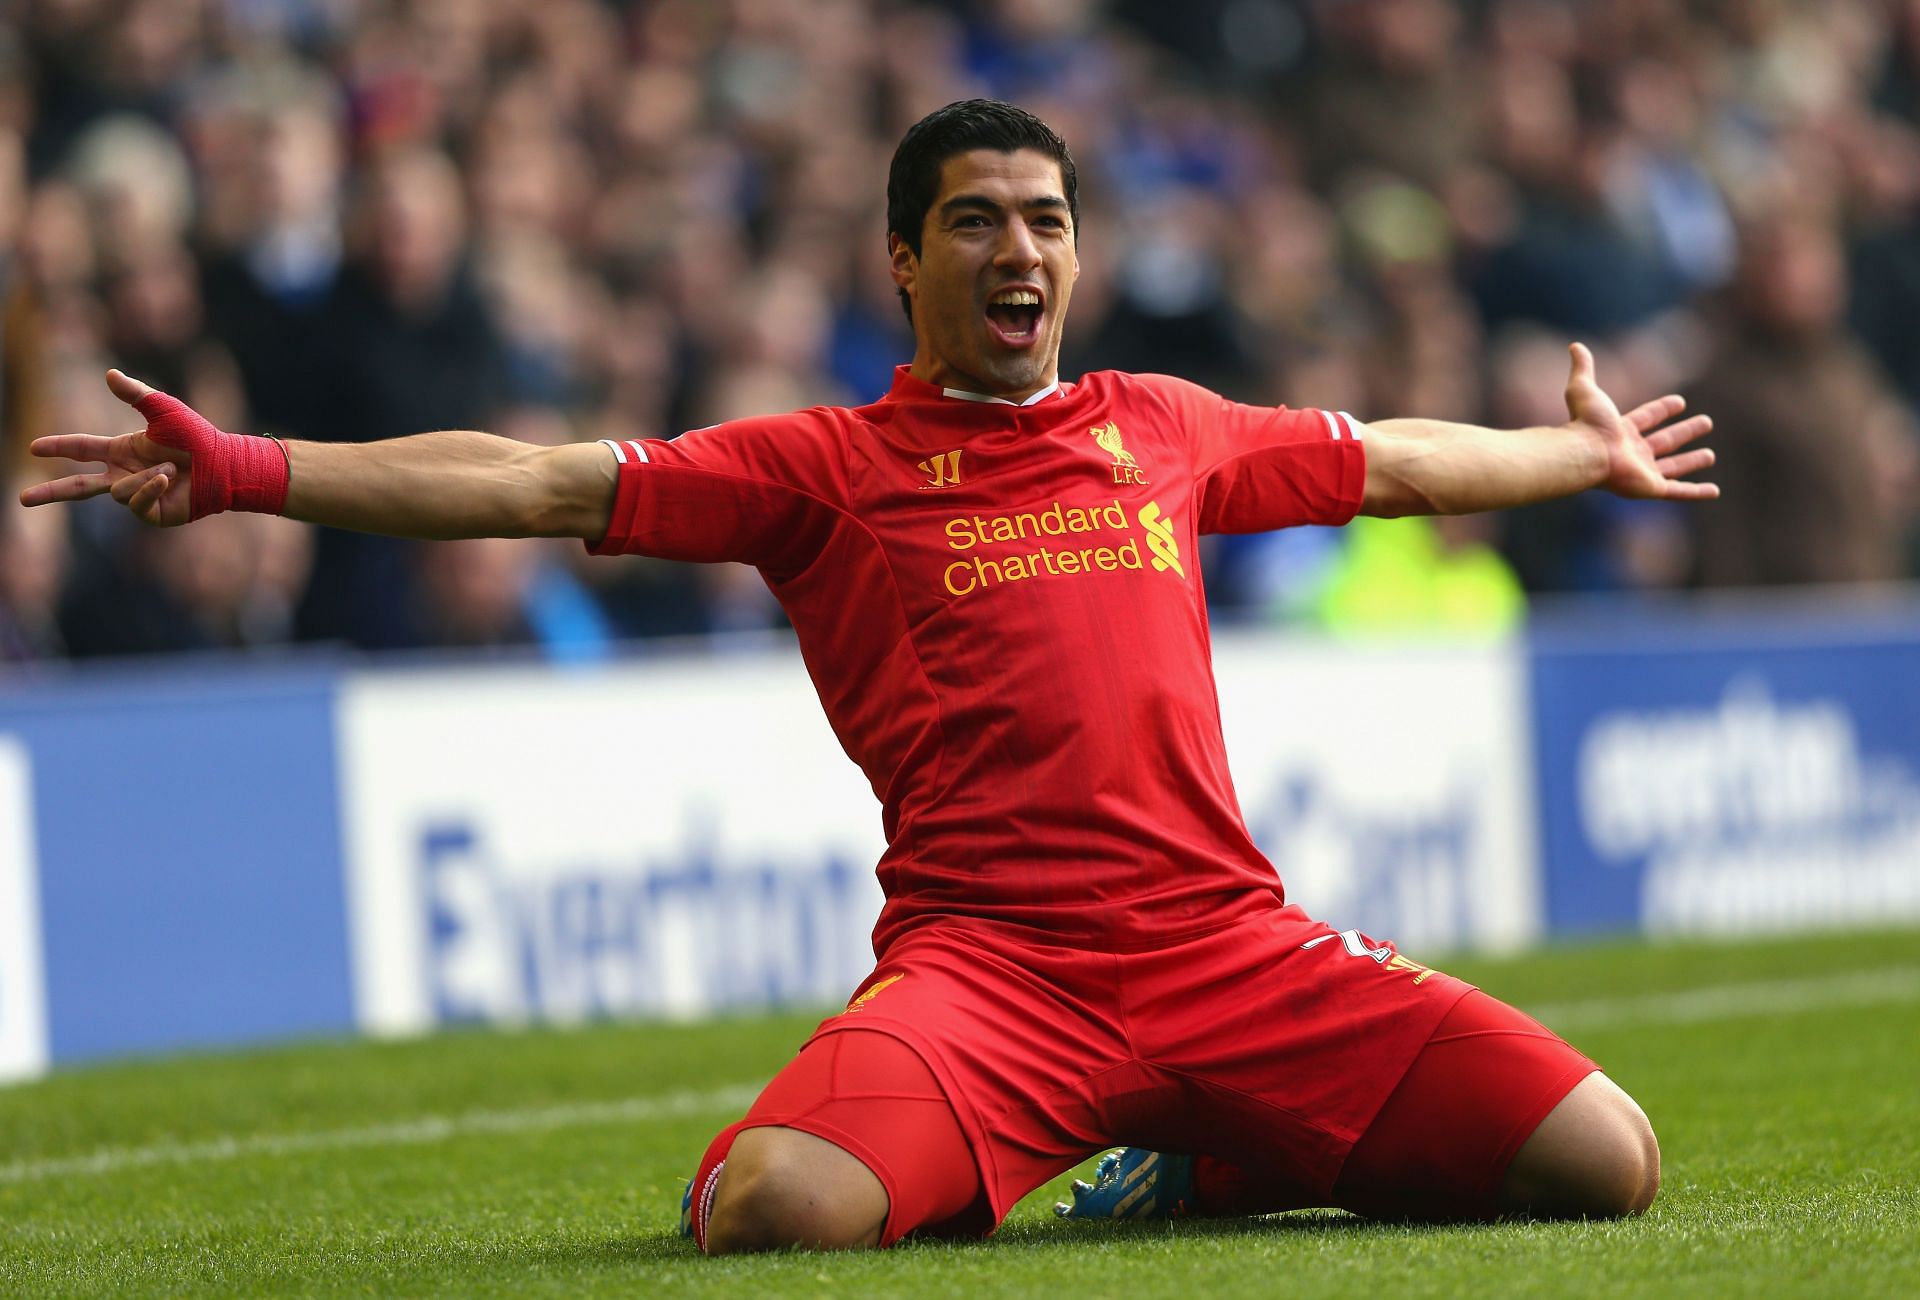 Luis Suarez enjoyed an excellent spell at Anfield